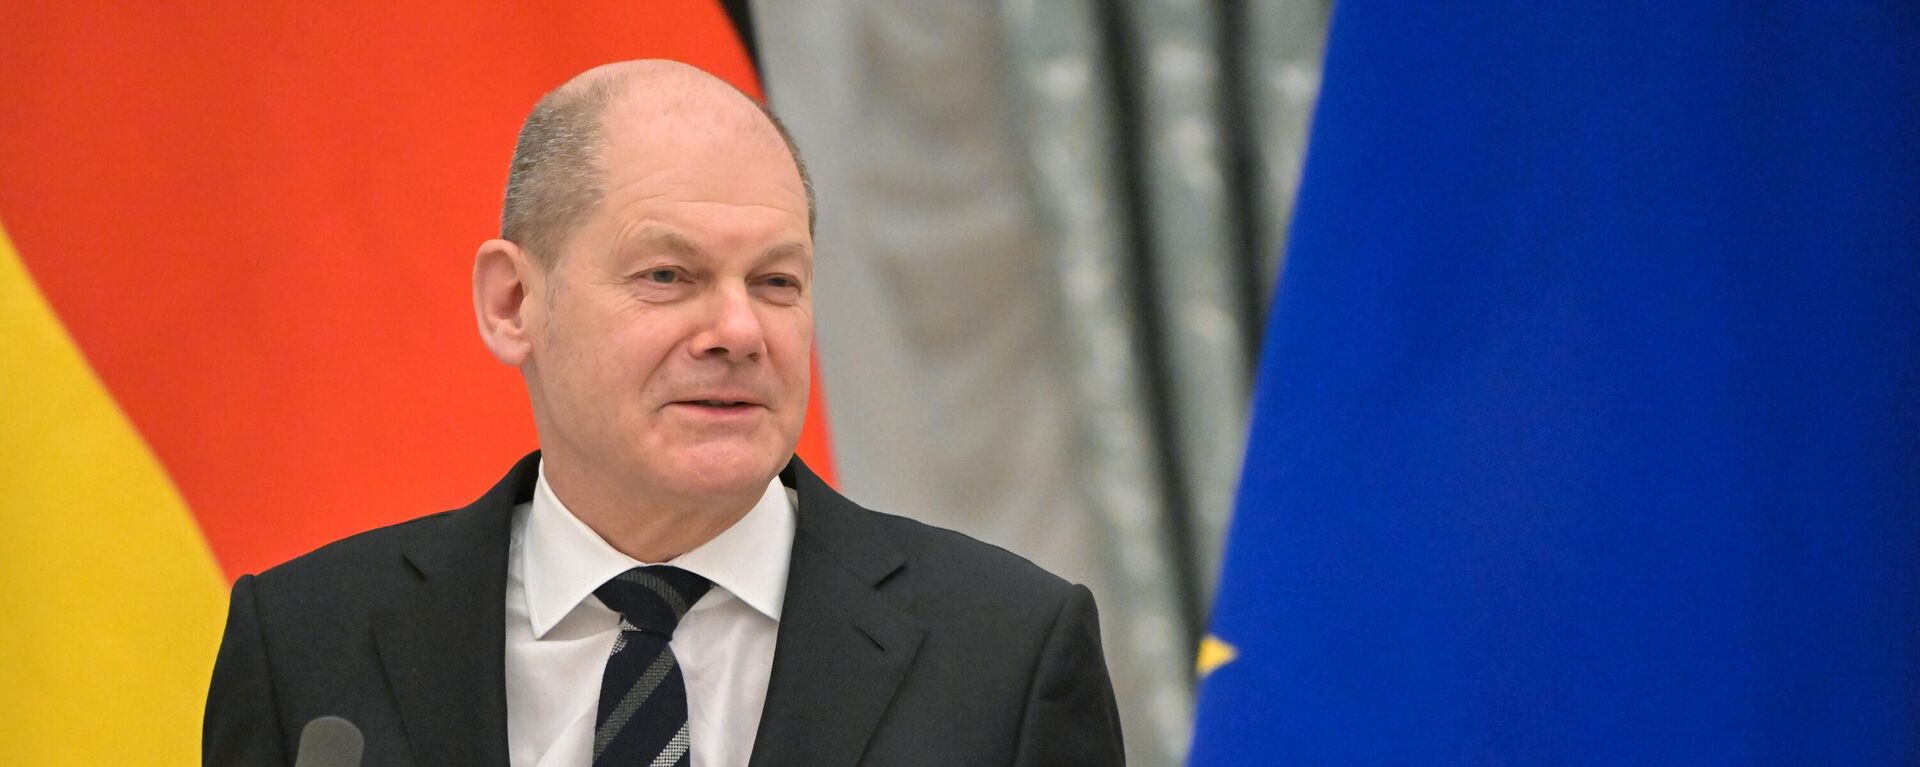 German Chancellor Olaf Scholz attends a joint press conference with Russian President Vladimir Putin following their meeting at Moscow's Kremlin, Russia. - Sputnik International, 1920, 09.12.2023